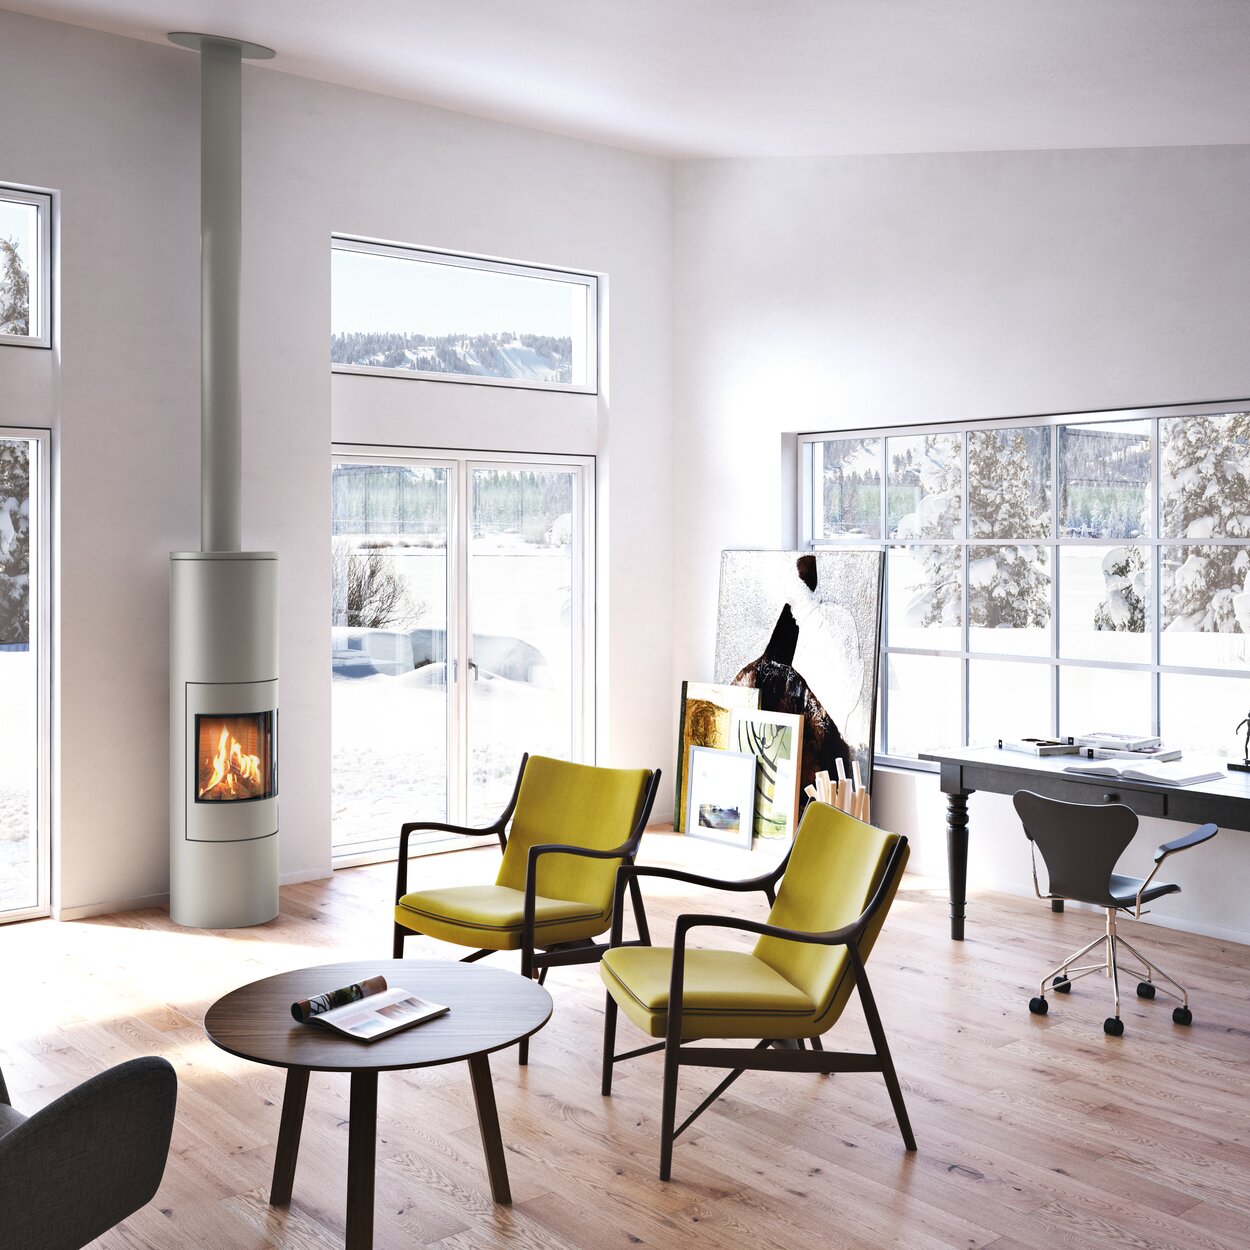 Gas stove VIVA 160 L in nickel with steel door in the office with large windows surrounded by a snow-covered winter landscape